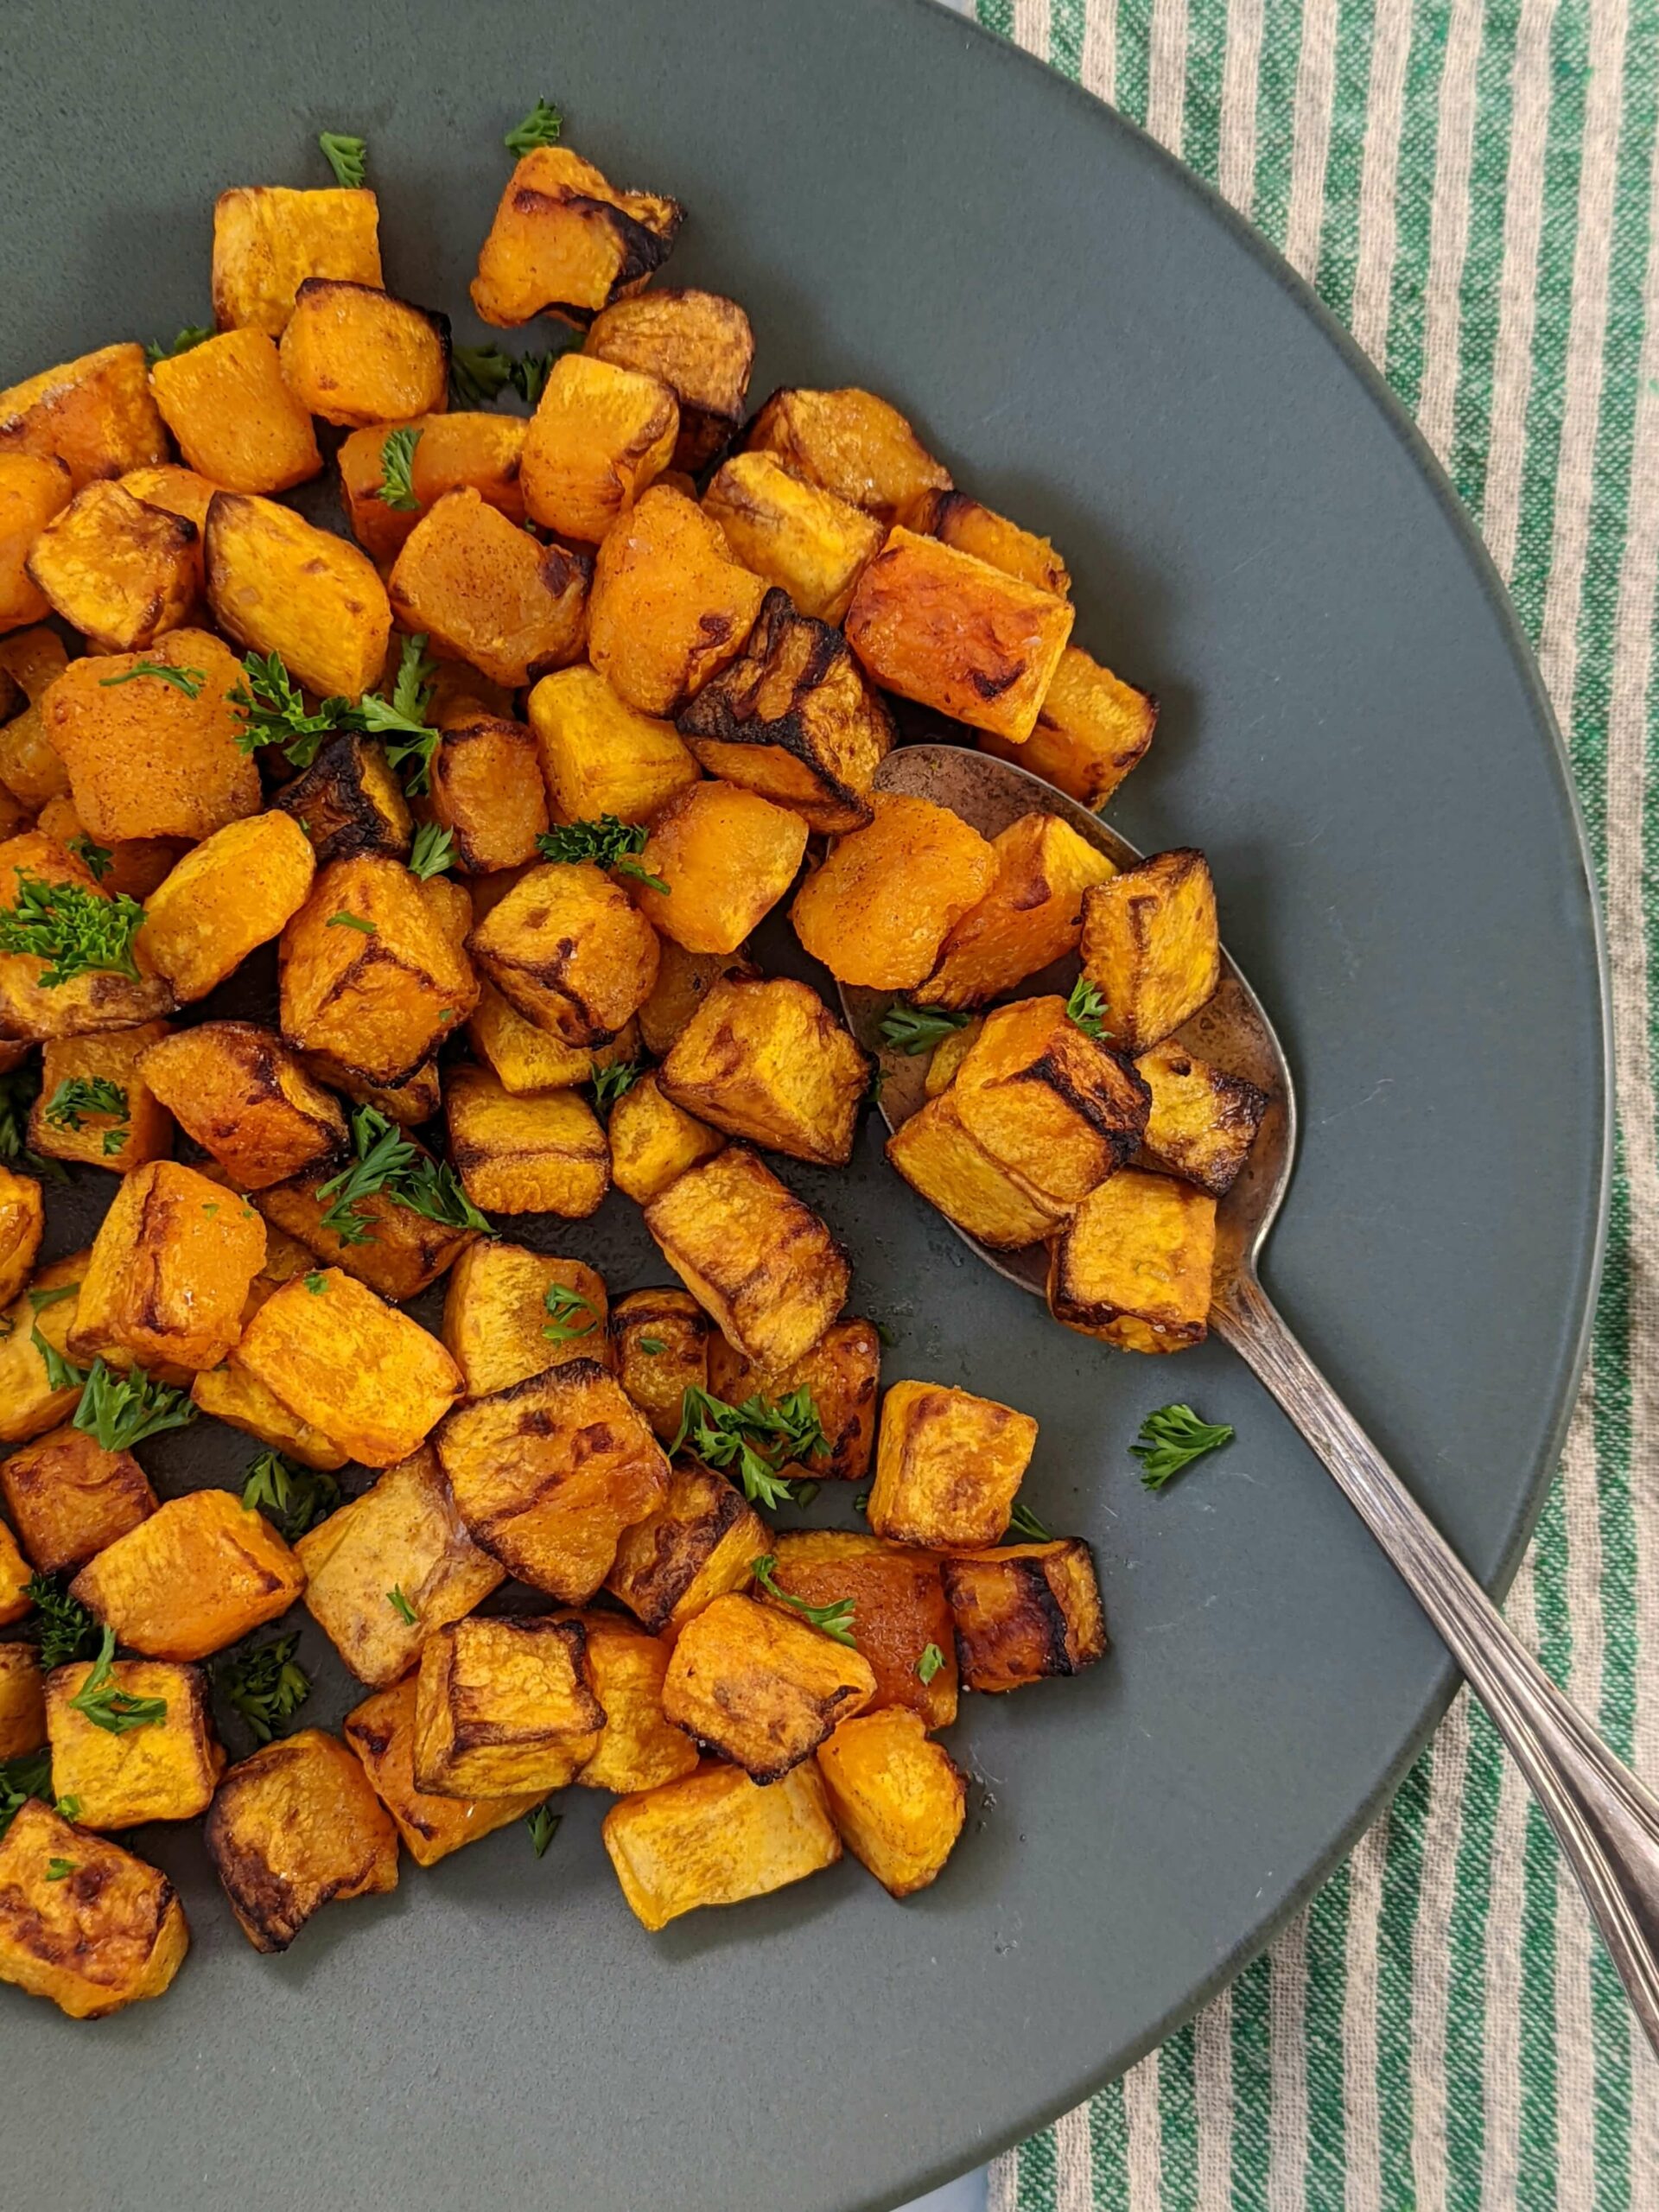 A plate of butternut squash with parsley.